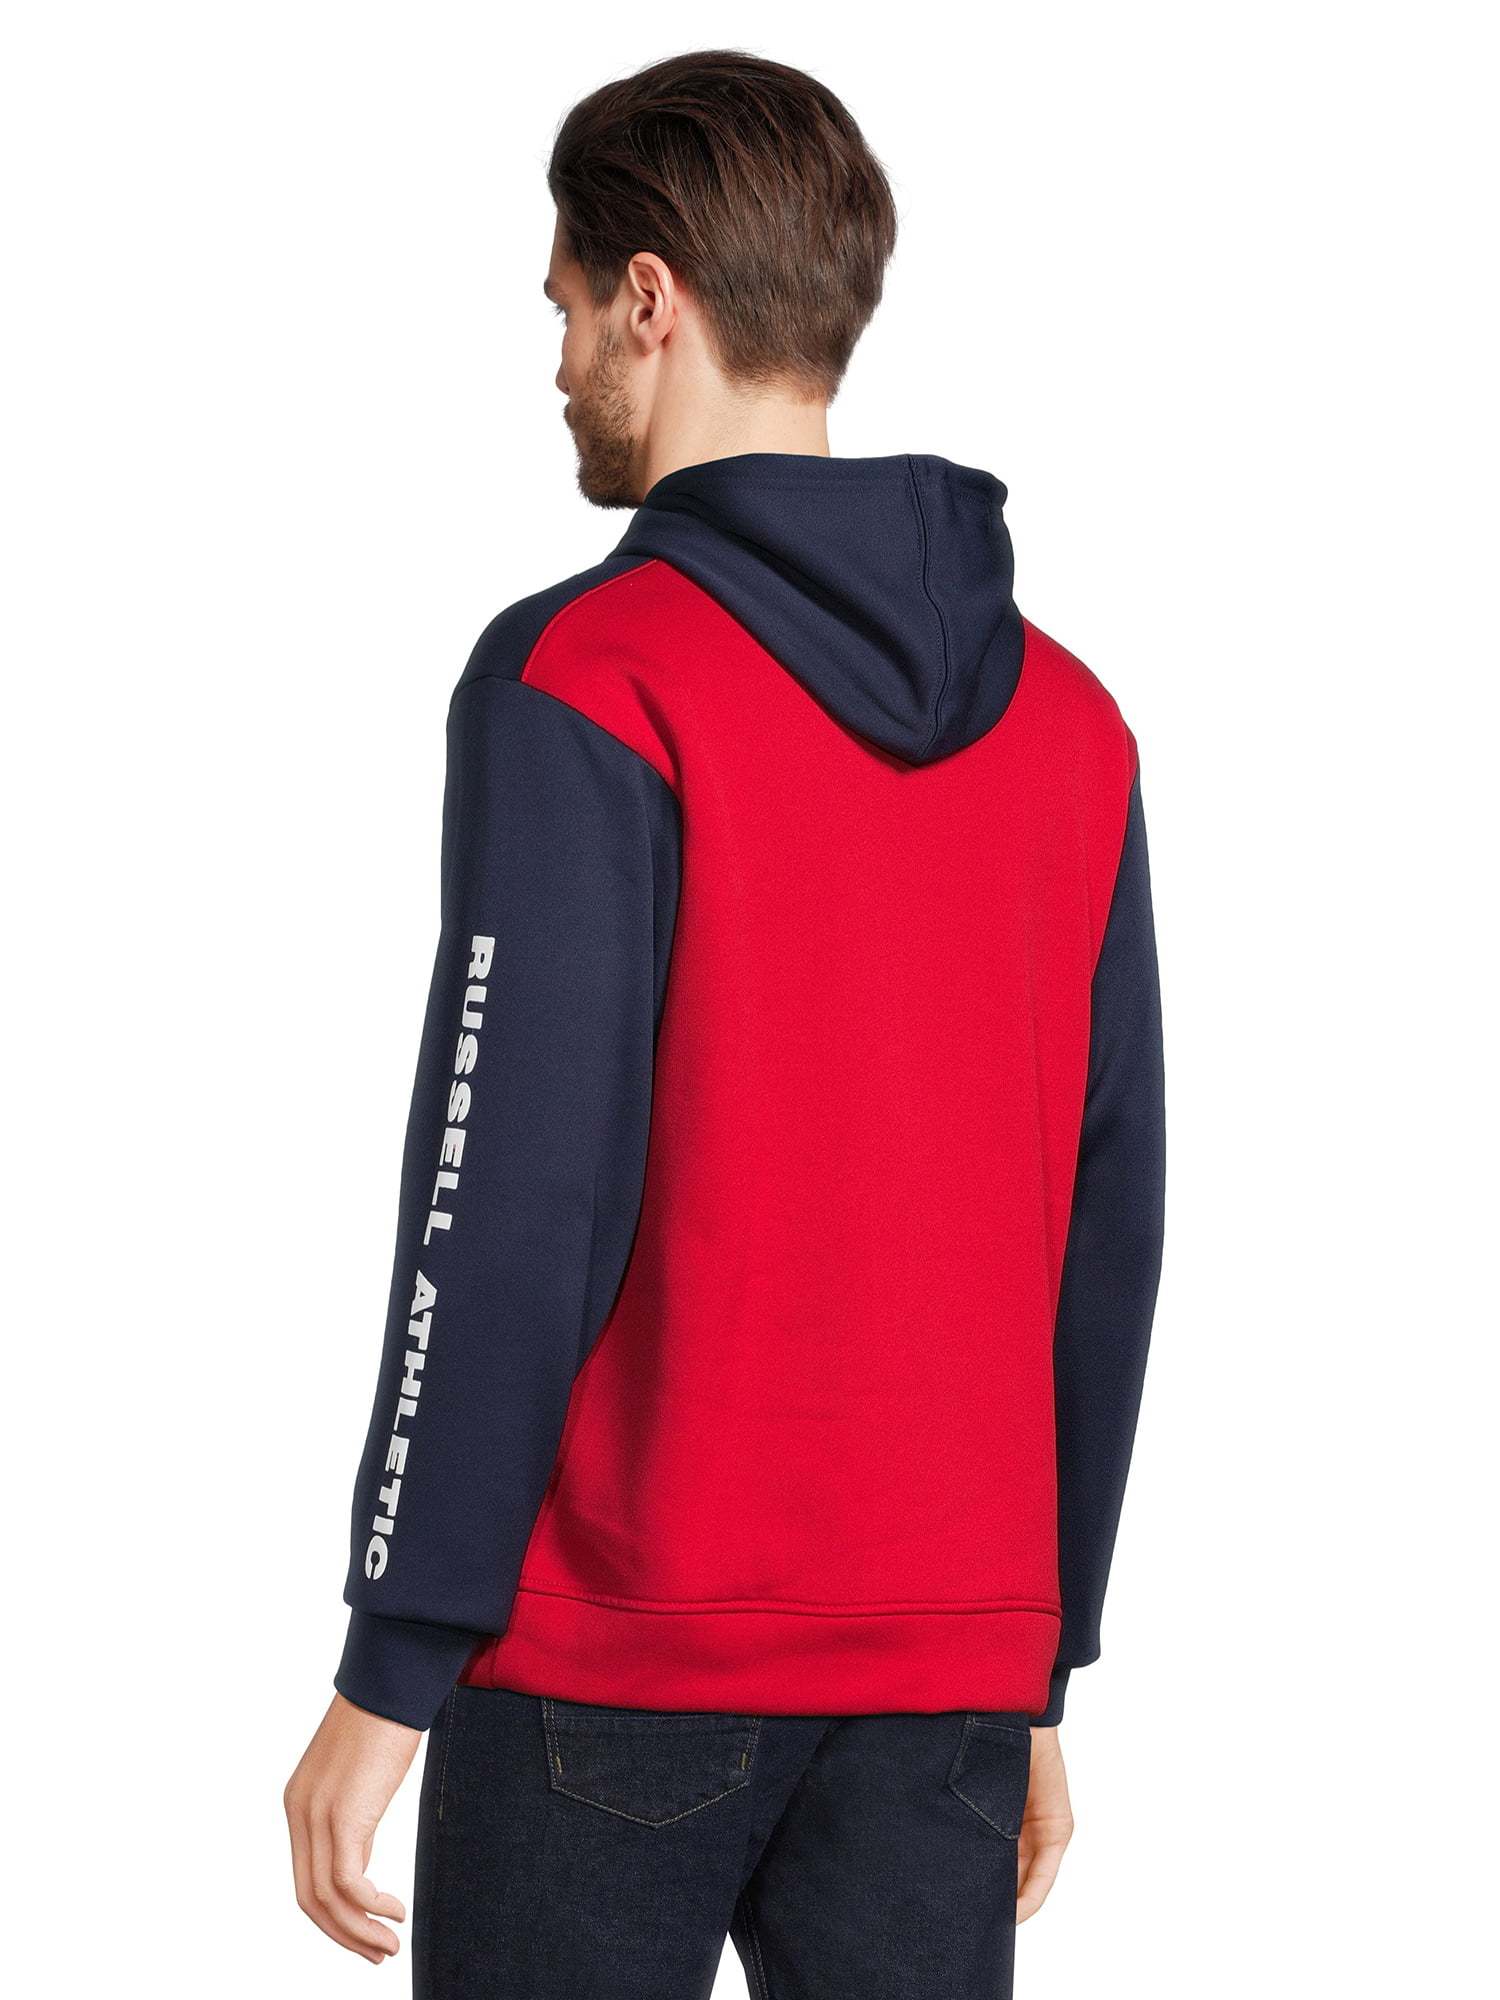 Russell Athletic Men's Colorblocked Fleece Hoodie, Sizes S-XL